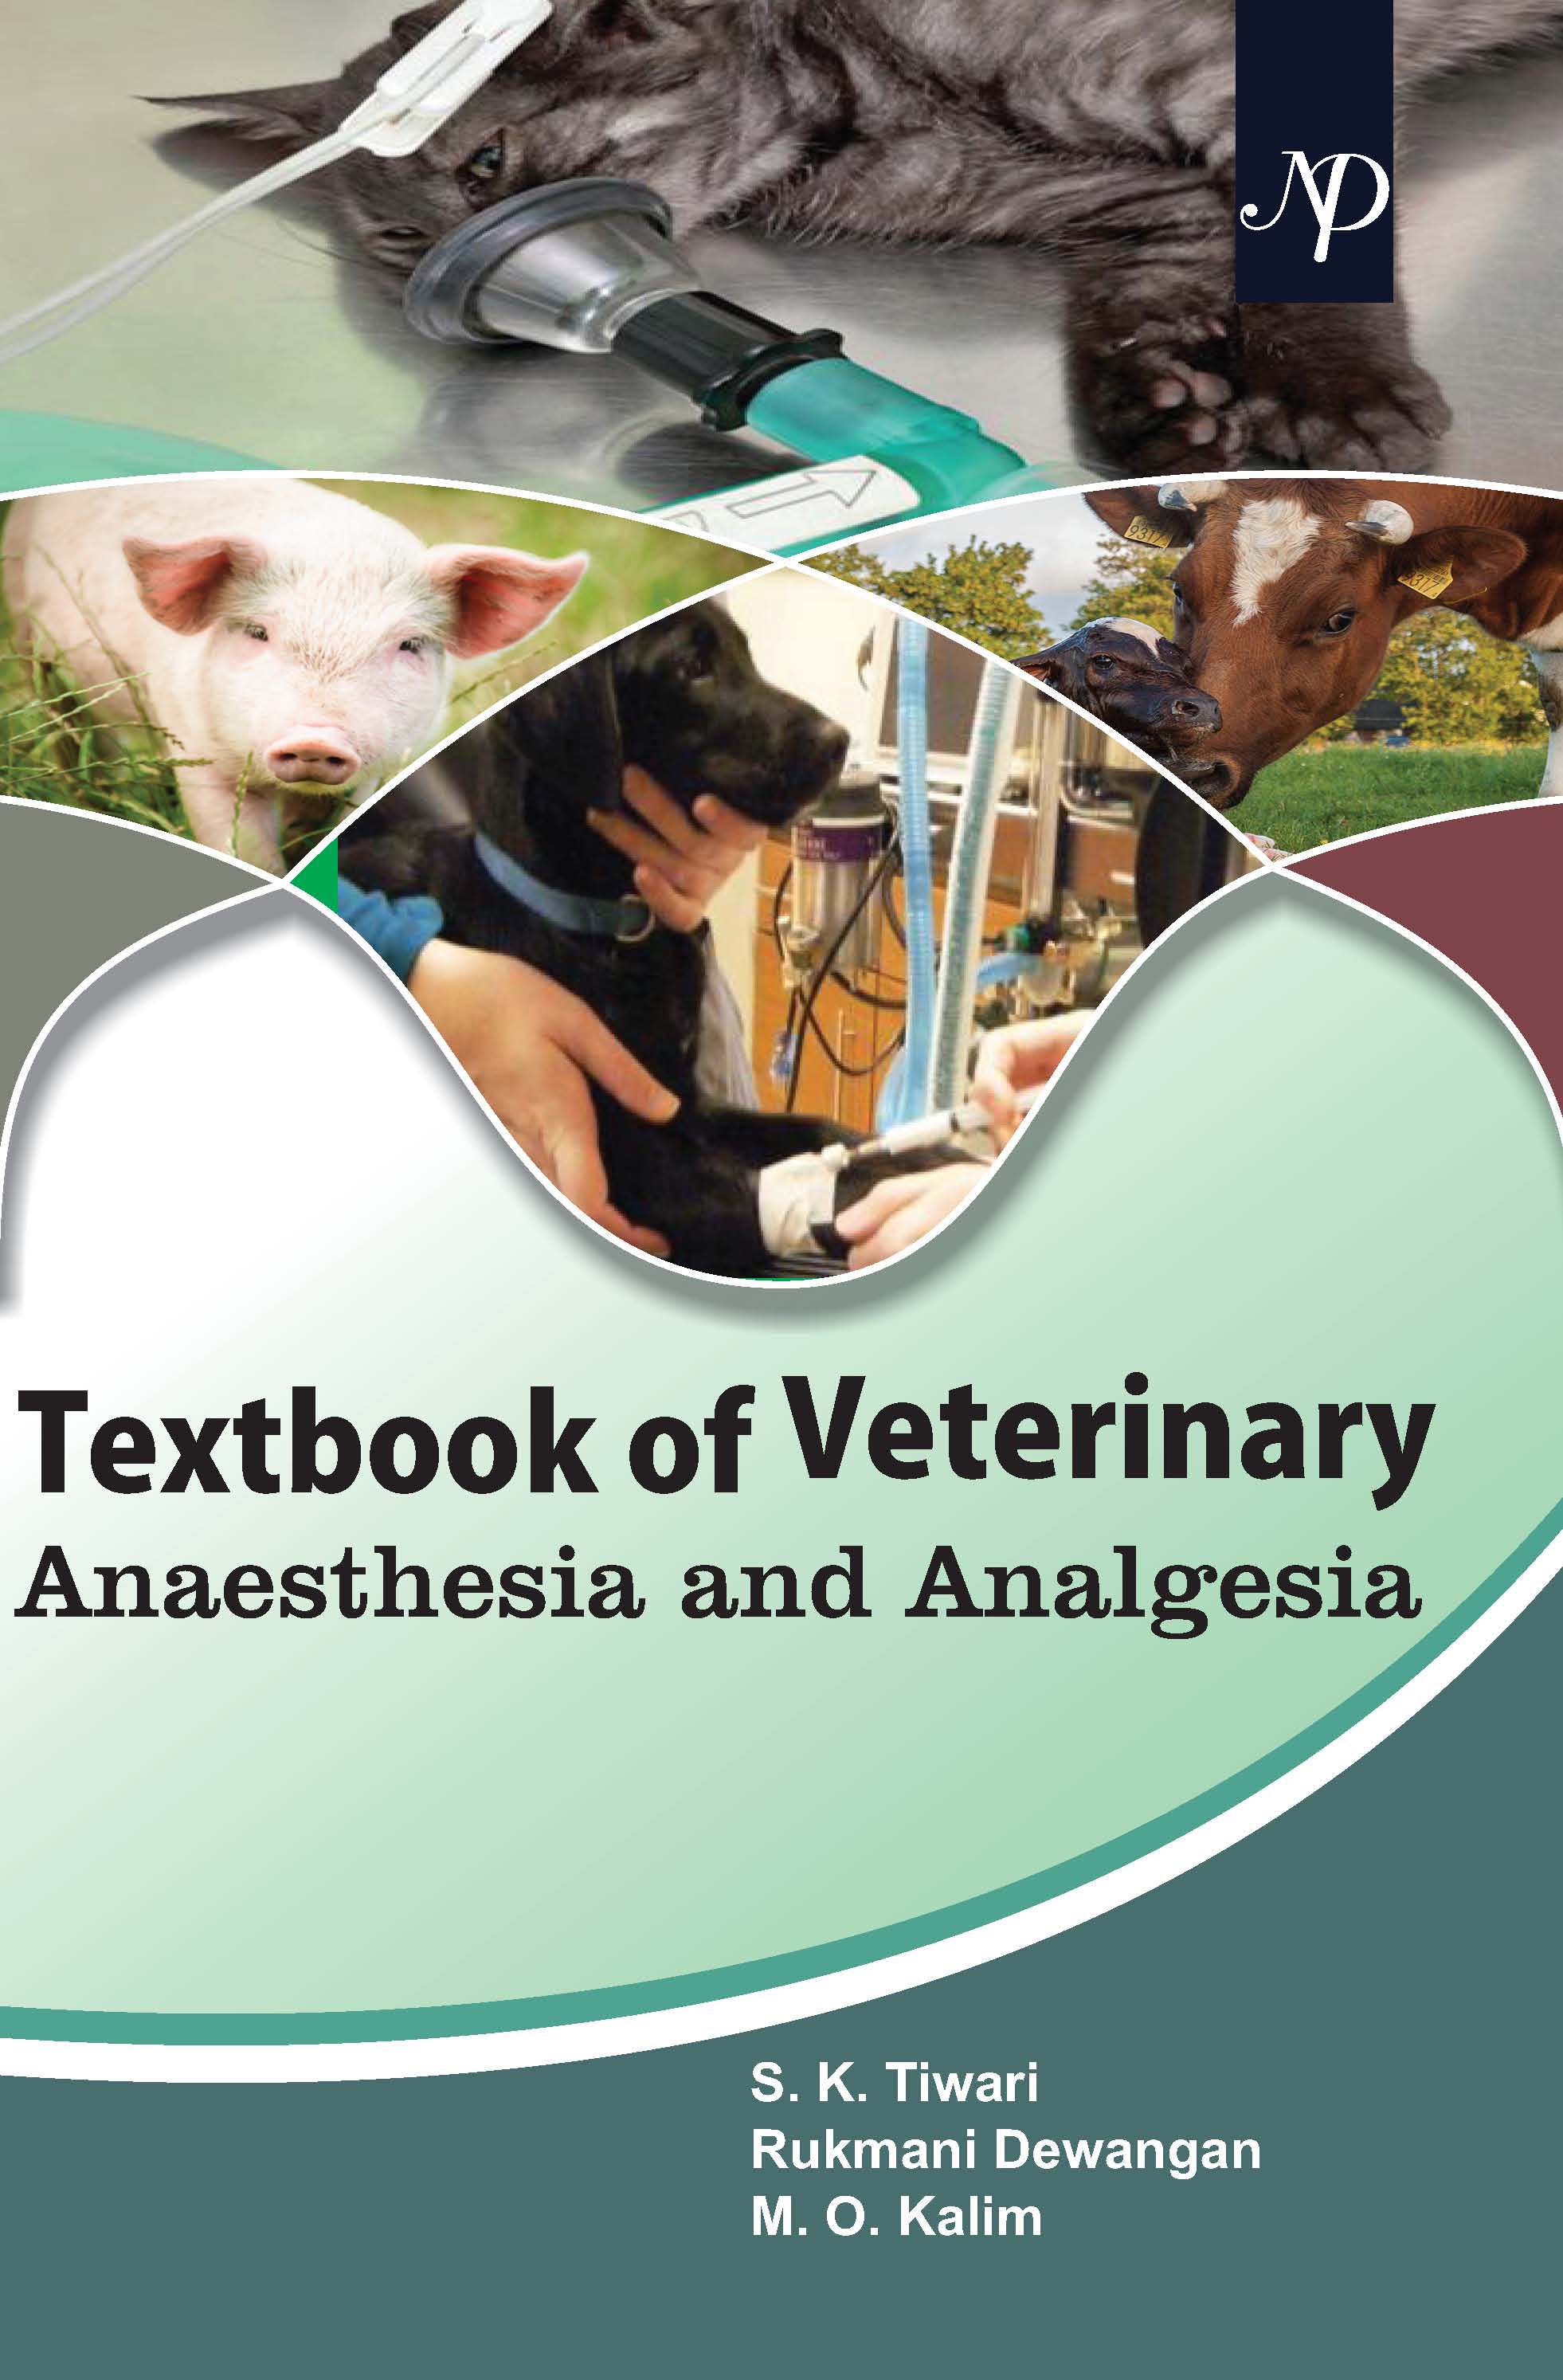 Text book of veterinary cover.jpg